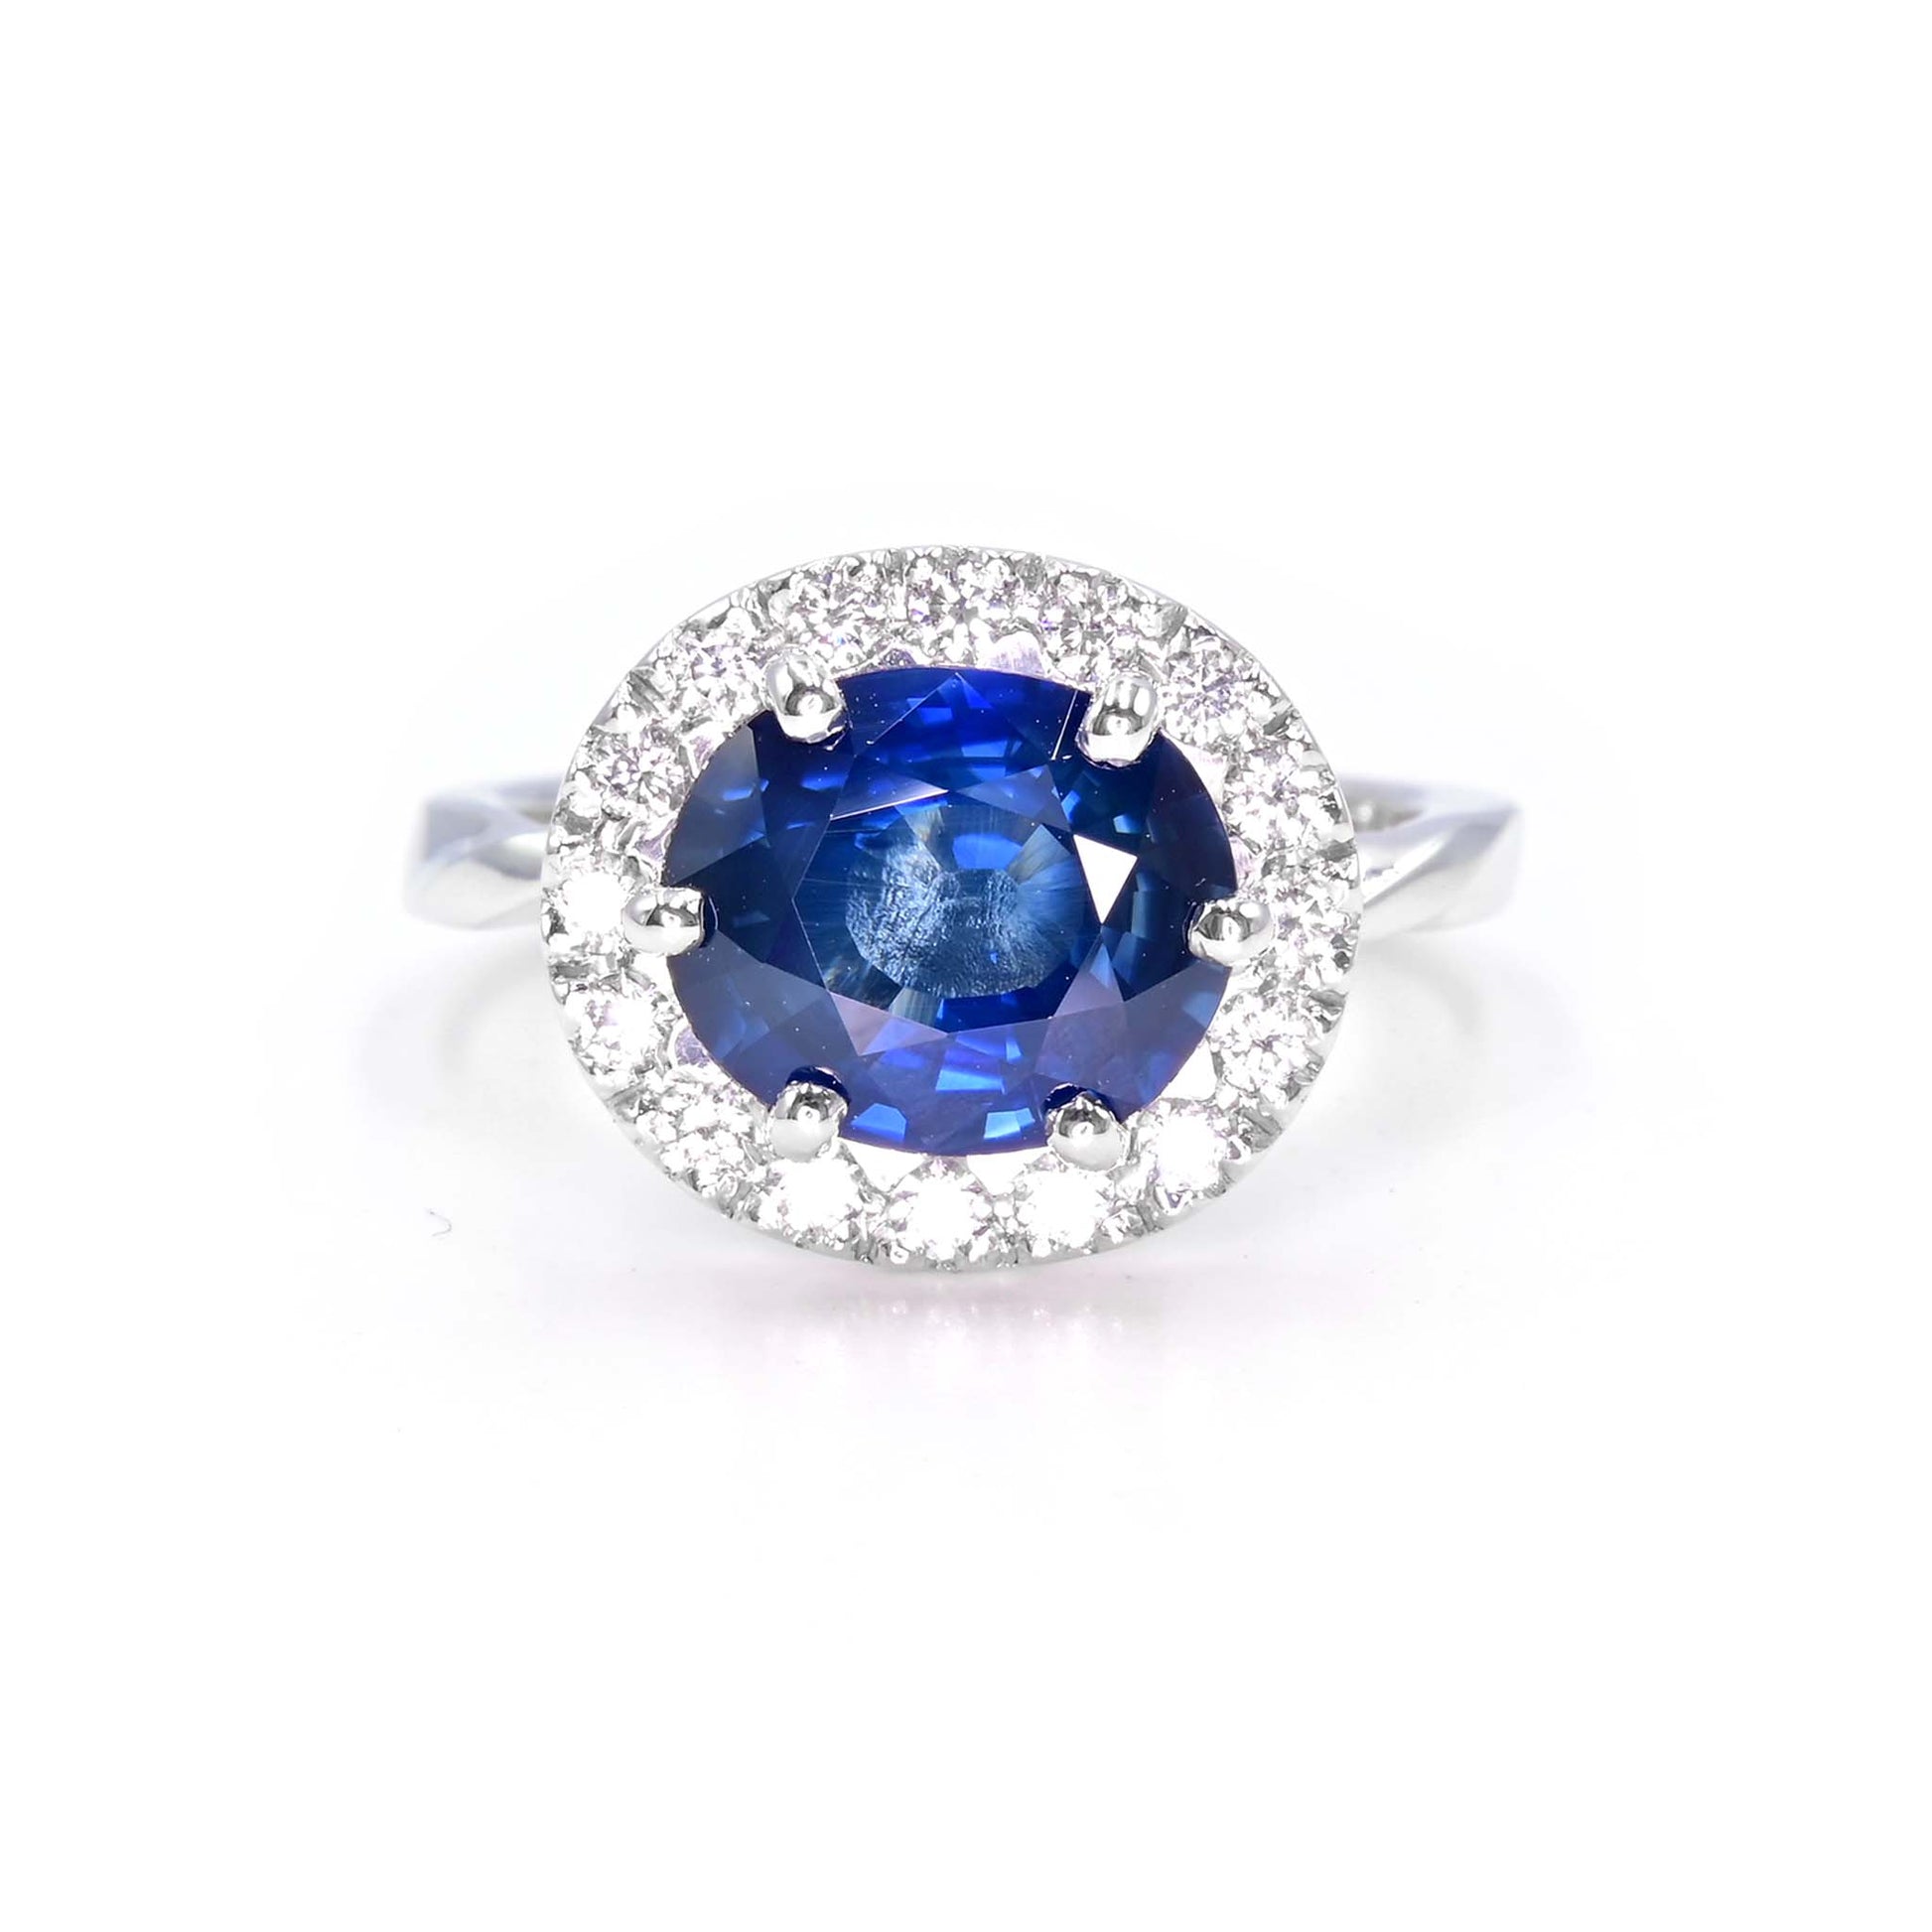 Amazing blue sapphire ring with diamonds halo. Set in 18K white gold is perfect for anniversary gift